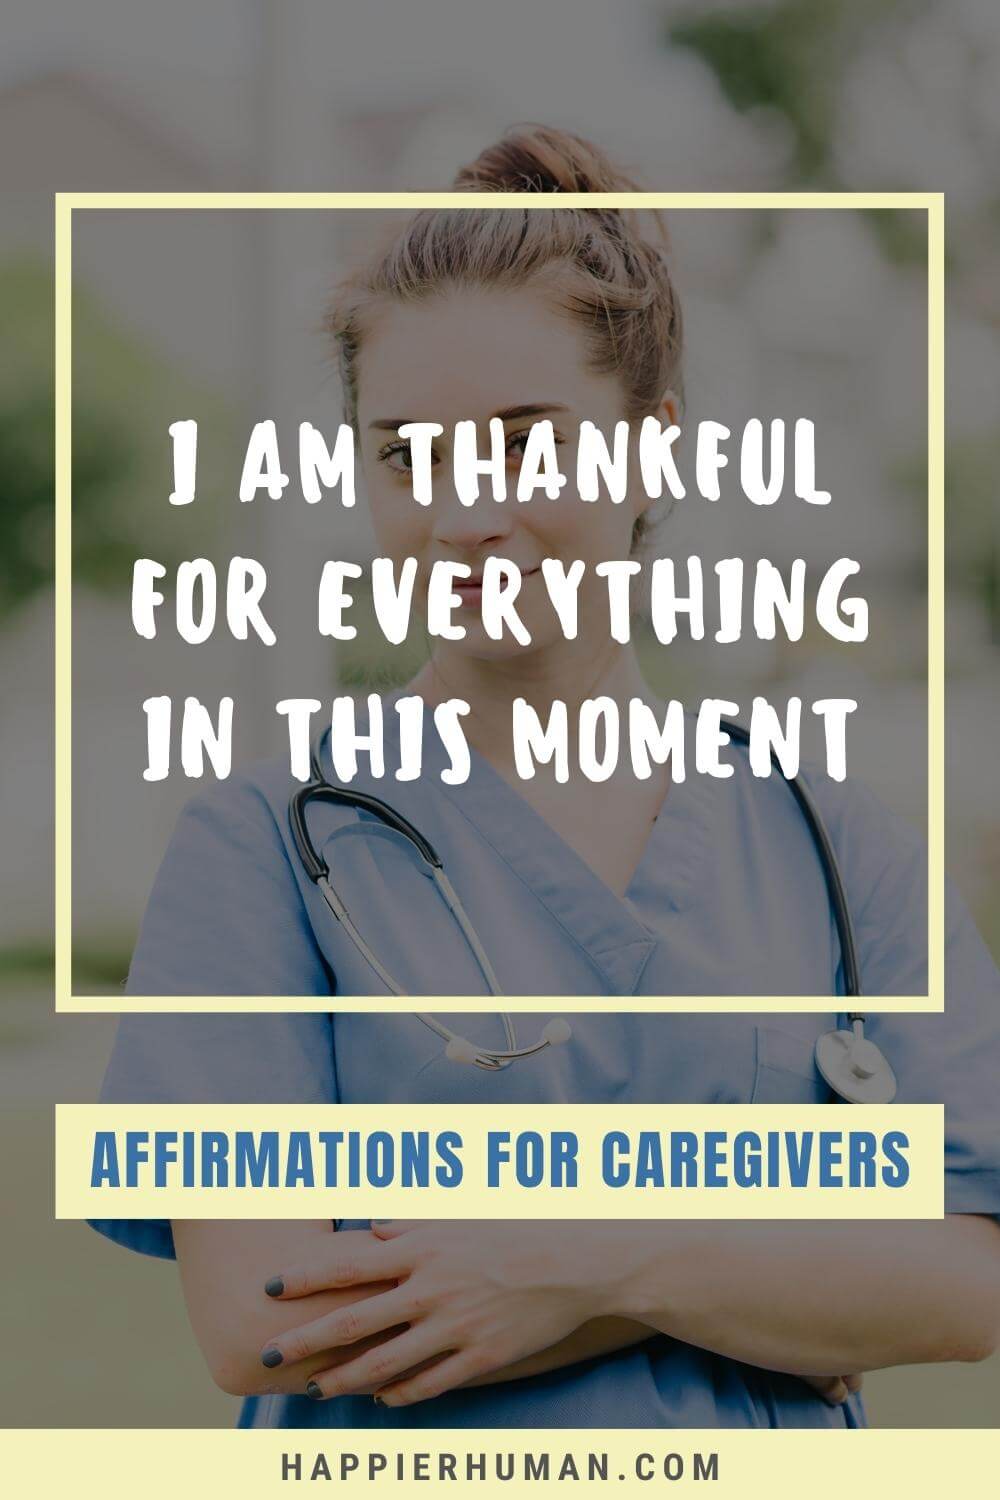 Affirmations For Caregivers - I am thankful for everything in this moment | affirmations for staff | how to give positive affirmations to others | effects of caregiving on caregivers